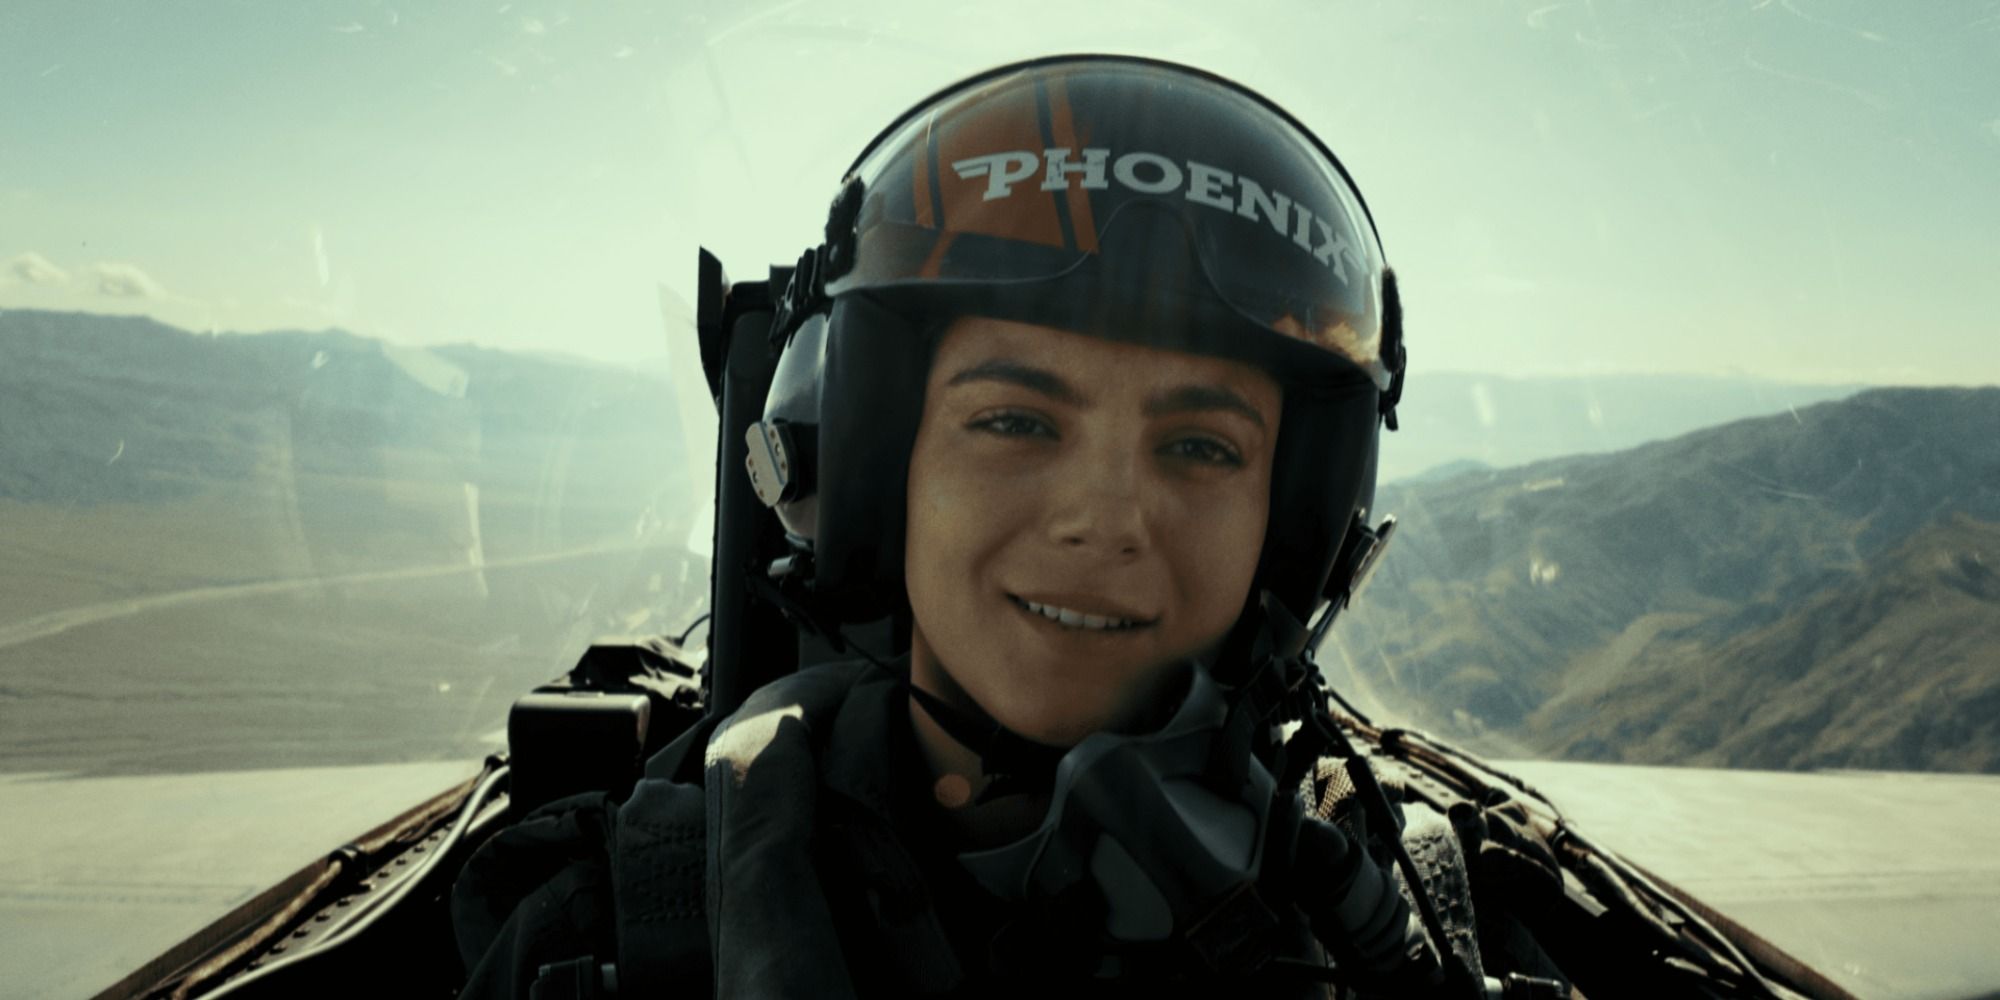 Monica Barbaro as Phoenix in the cockpit flying 